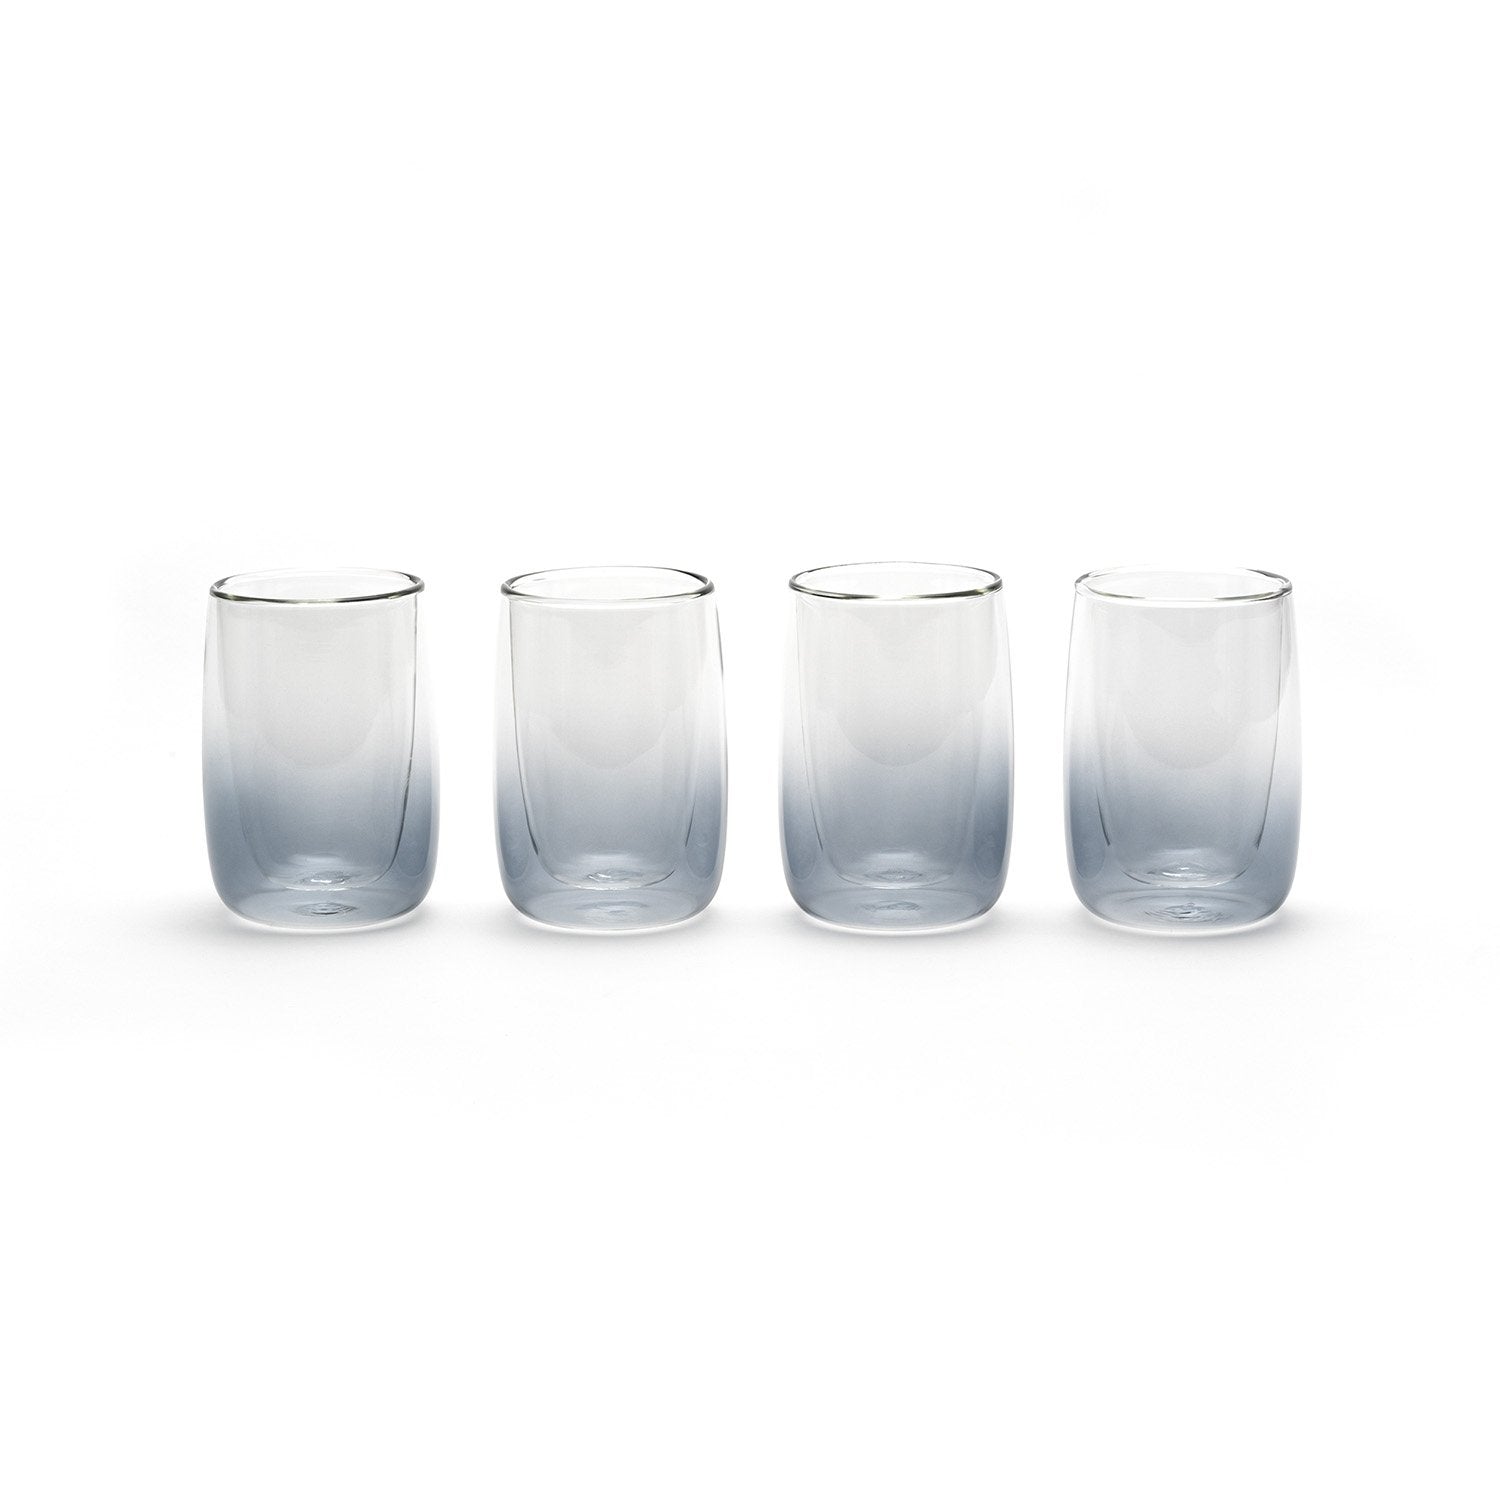 Four glass cups in a row